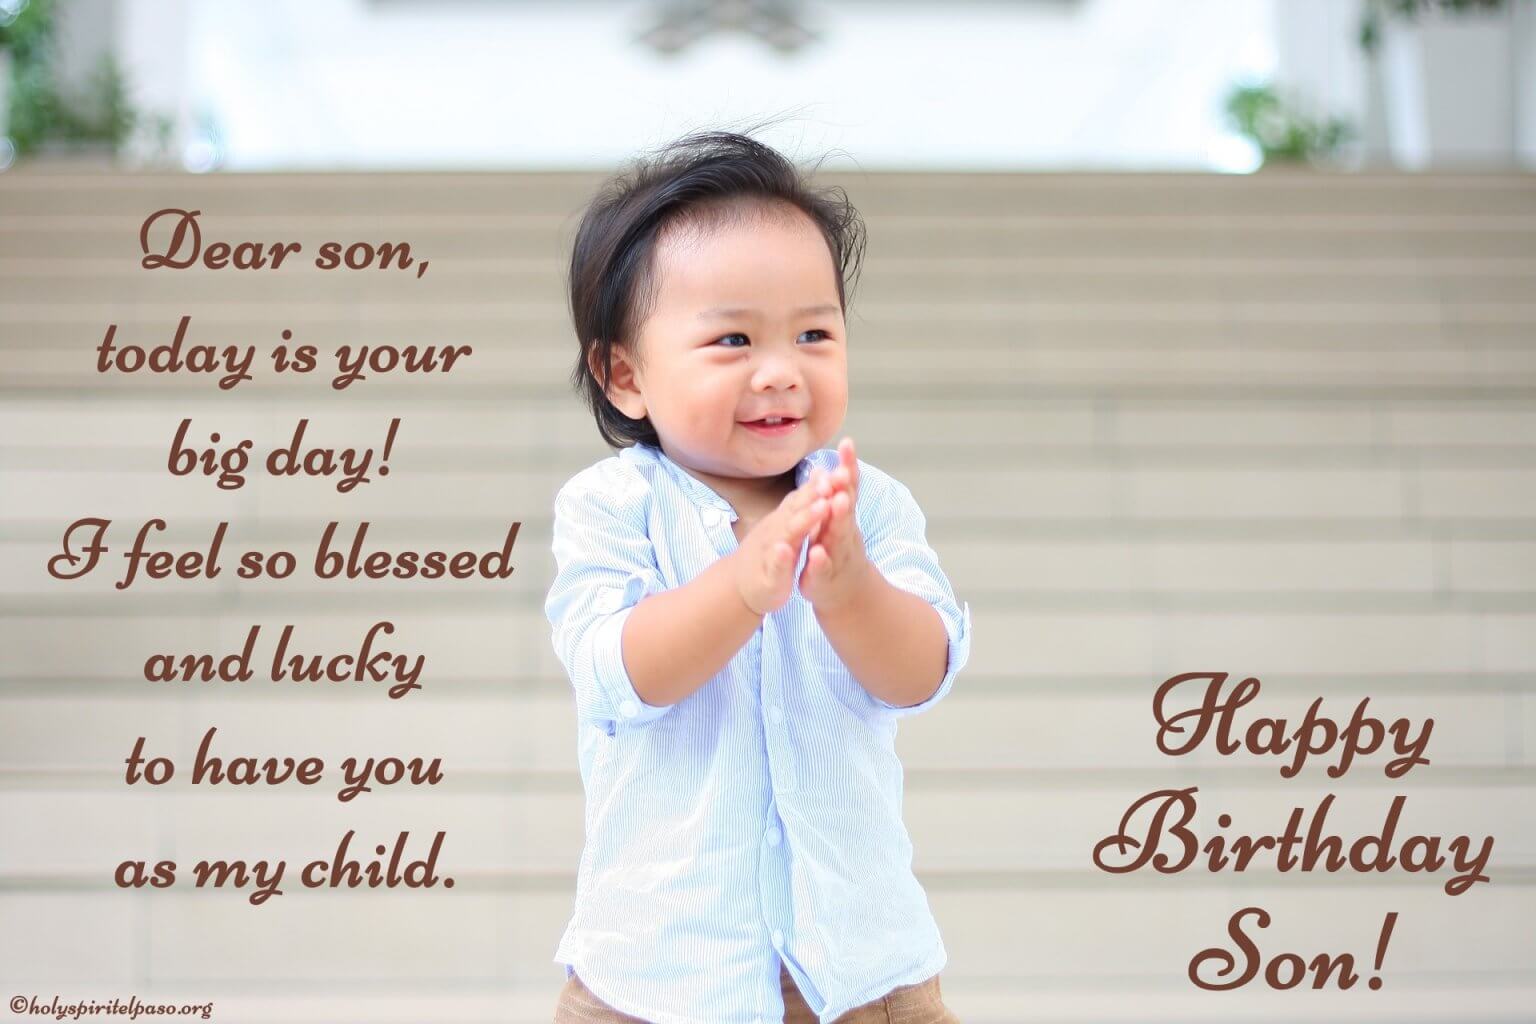 Happy Birthday Son Wishes, Quotes & Messages for My Son